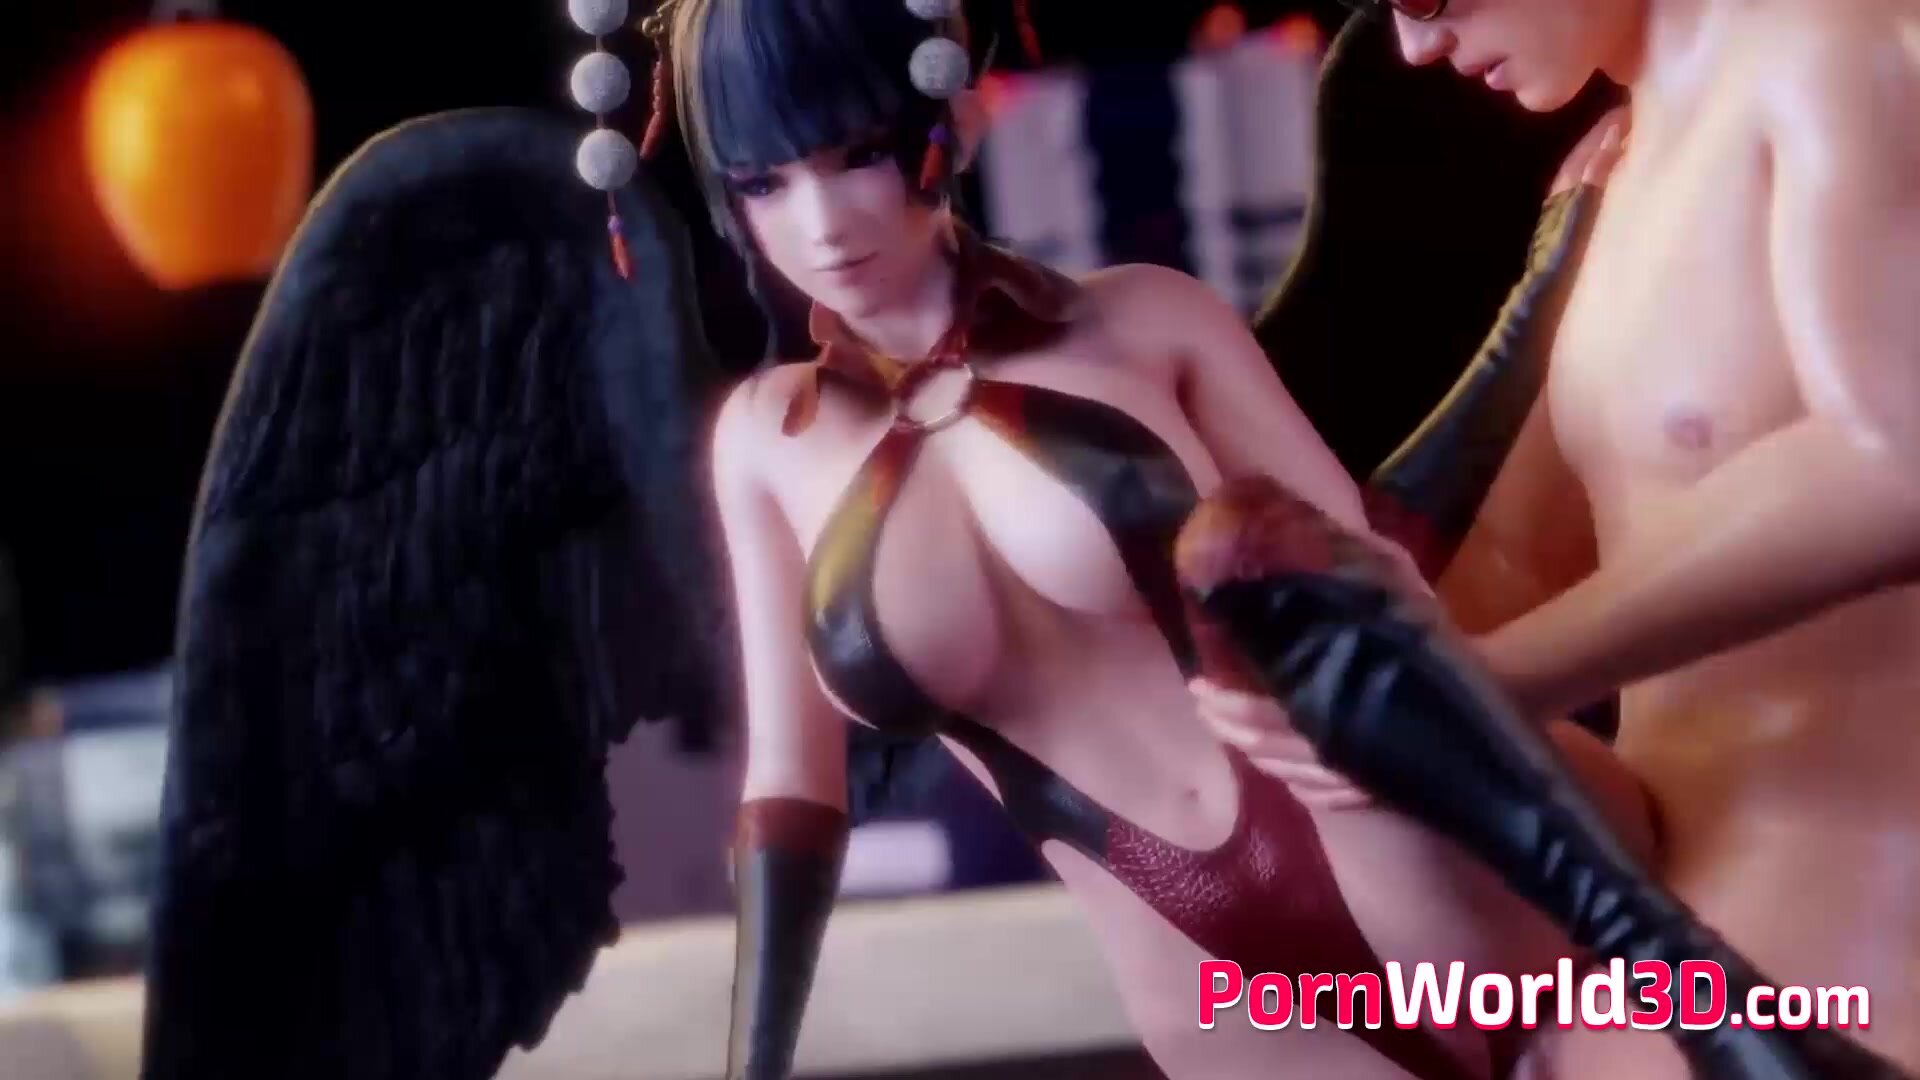 Games Anime Babes Compilation of Perfect 3D Fucked Scenes